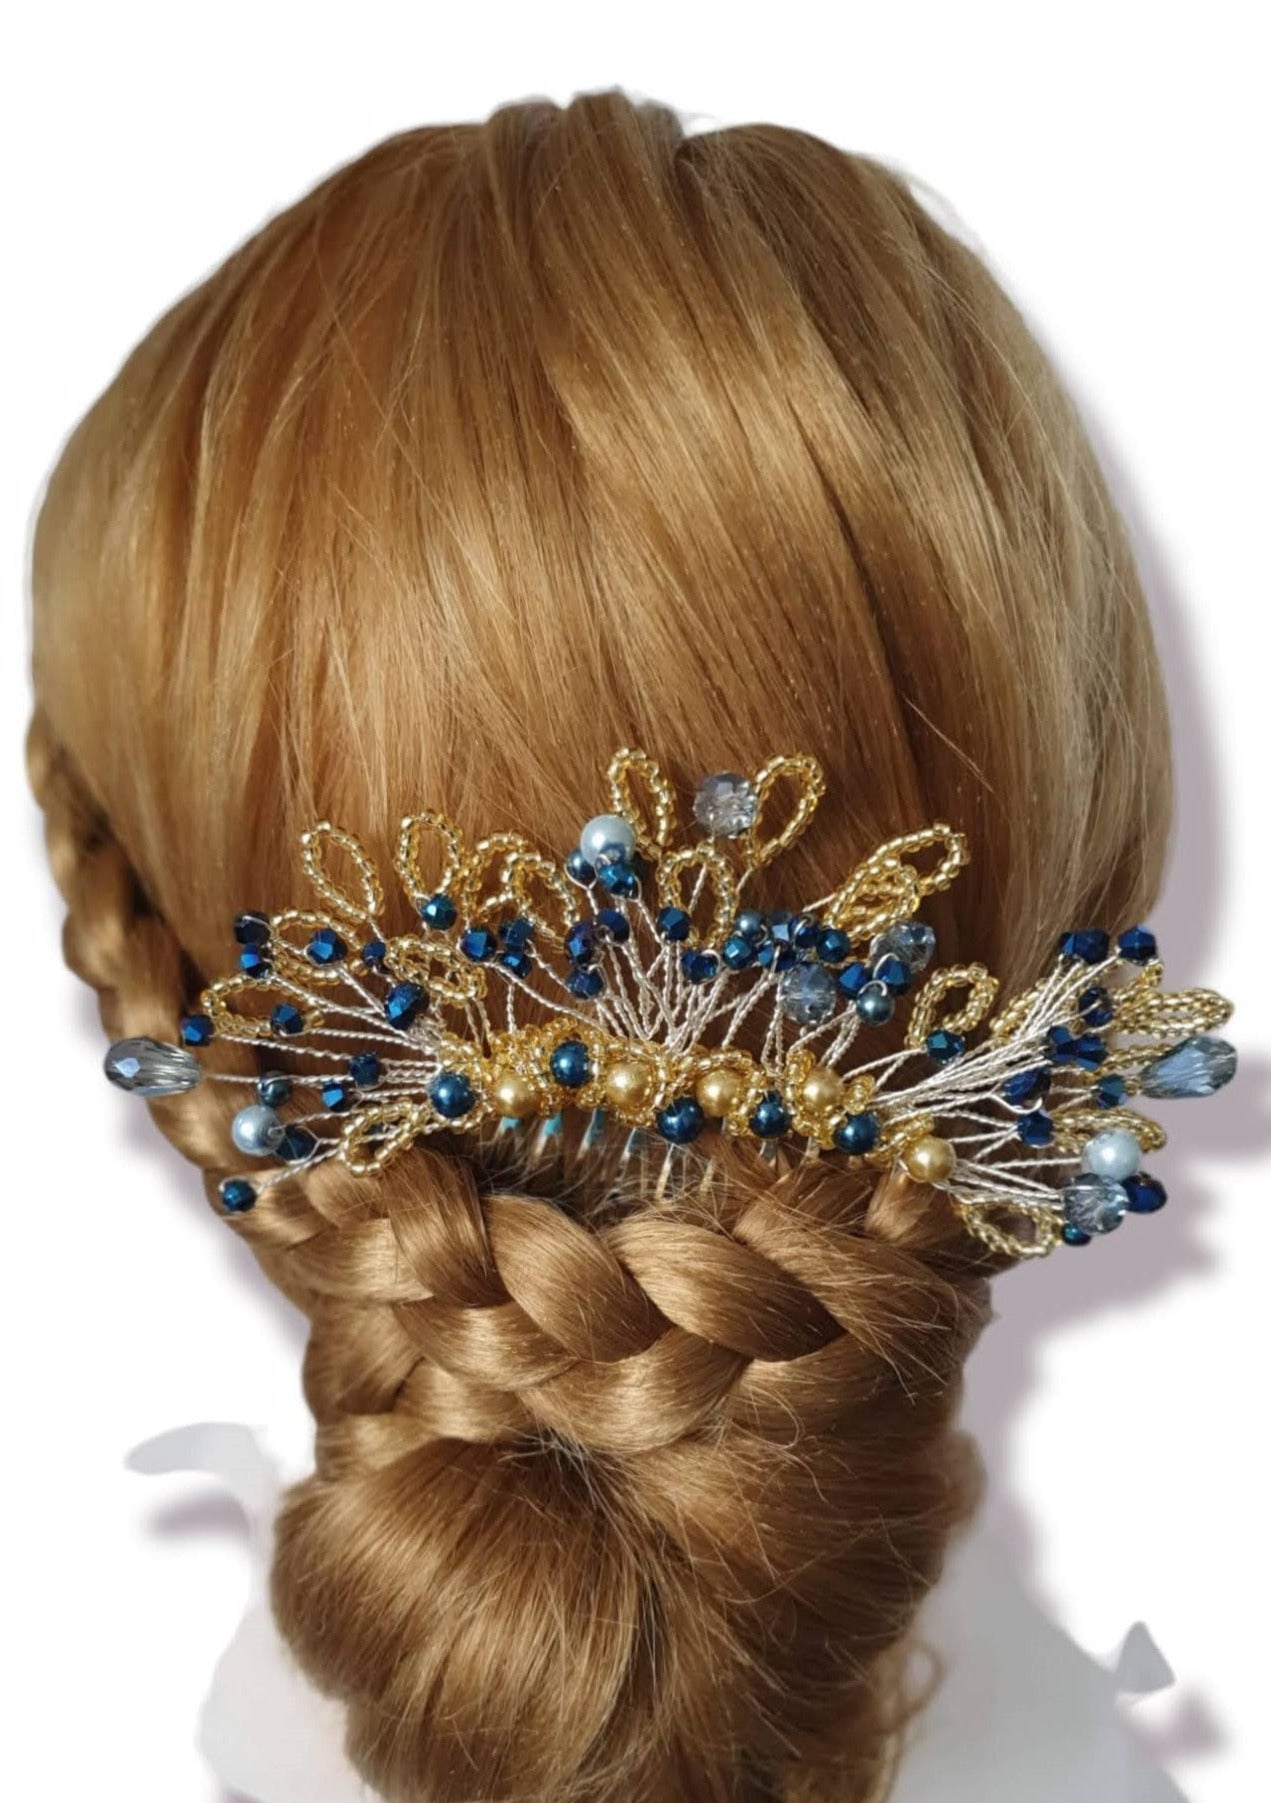 Handmade bridal comb with blue pearls and drop stones - elegant hair accessory for weddings and parties, silver-colored metal comb